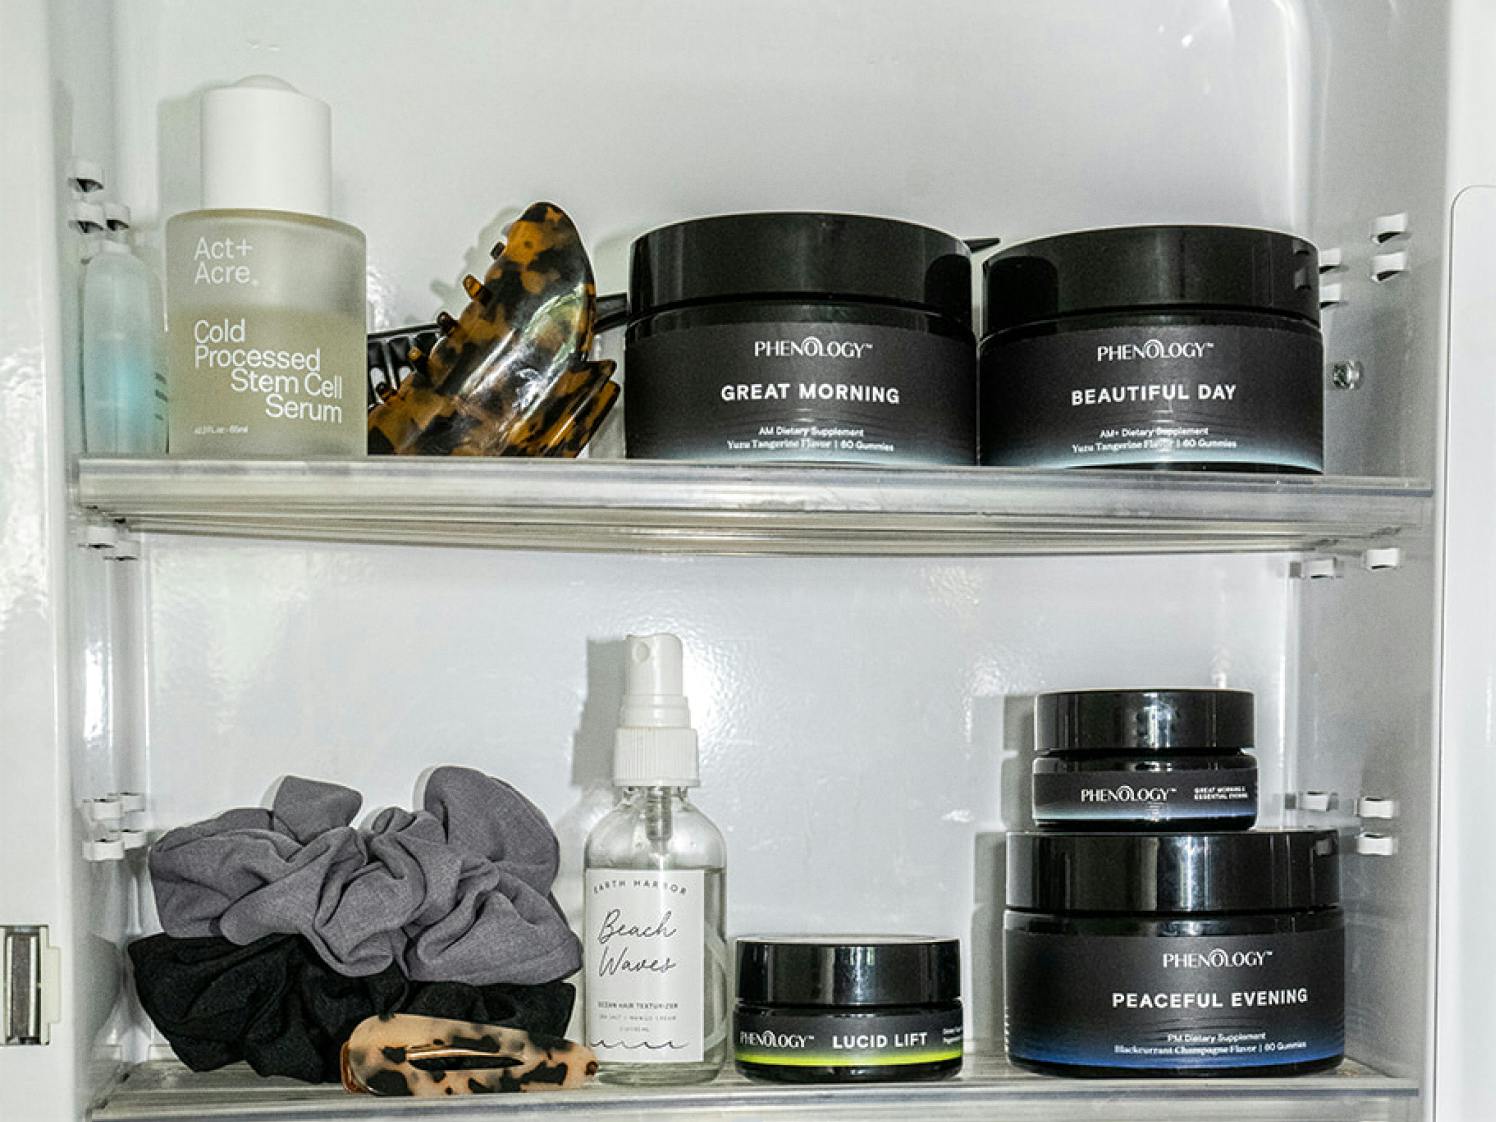 Medicine cabinet "shelfie" of beauty and wellness products for women, featuring Phenology produc